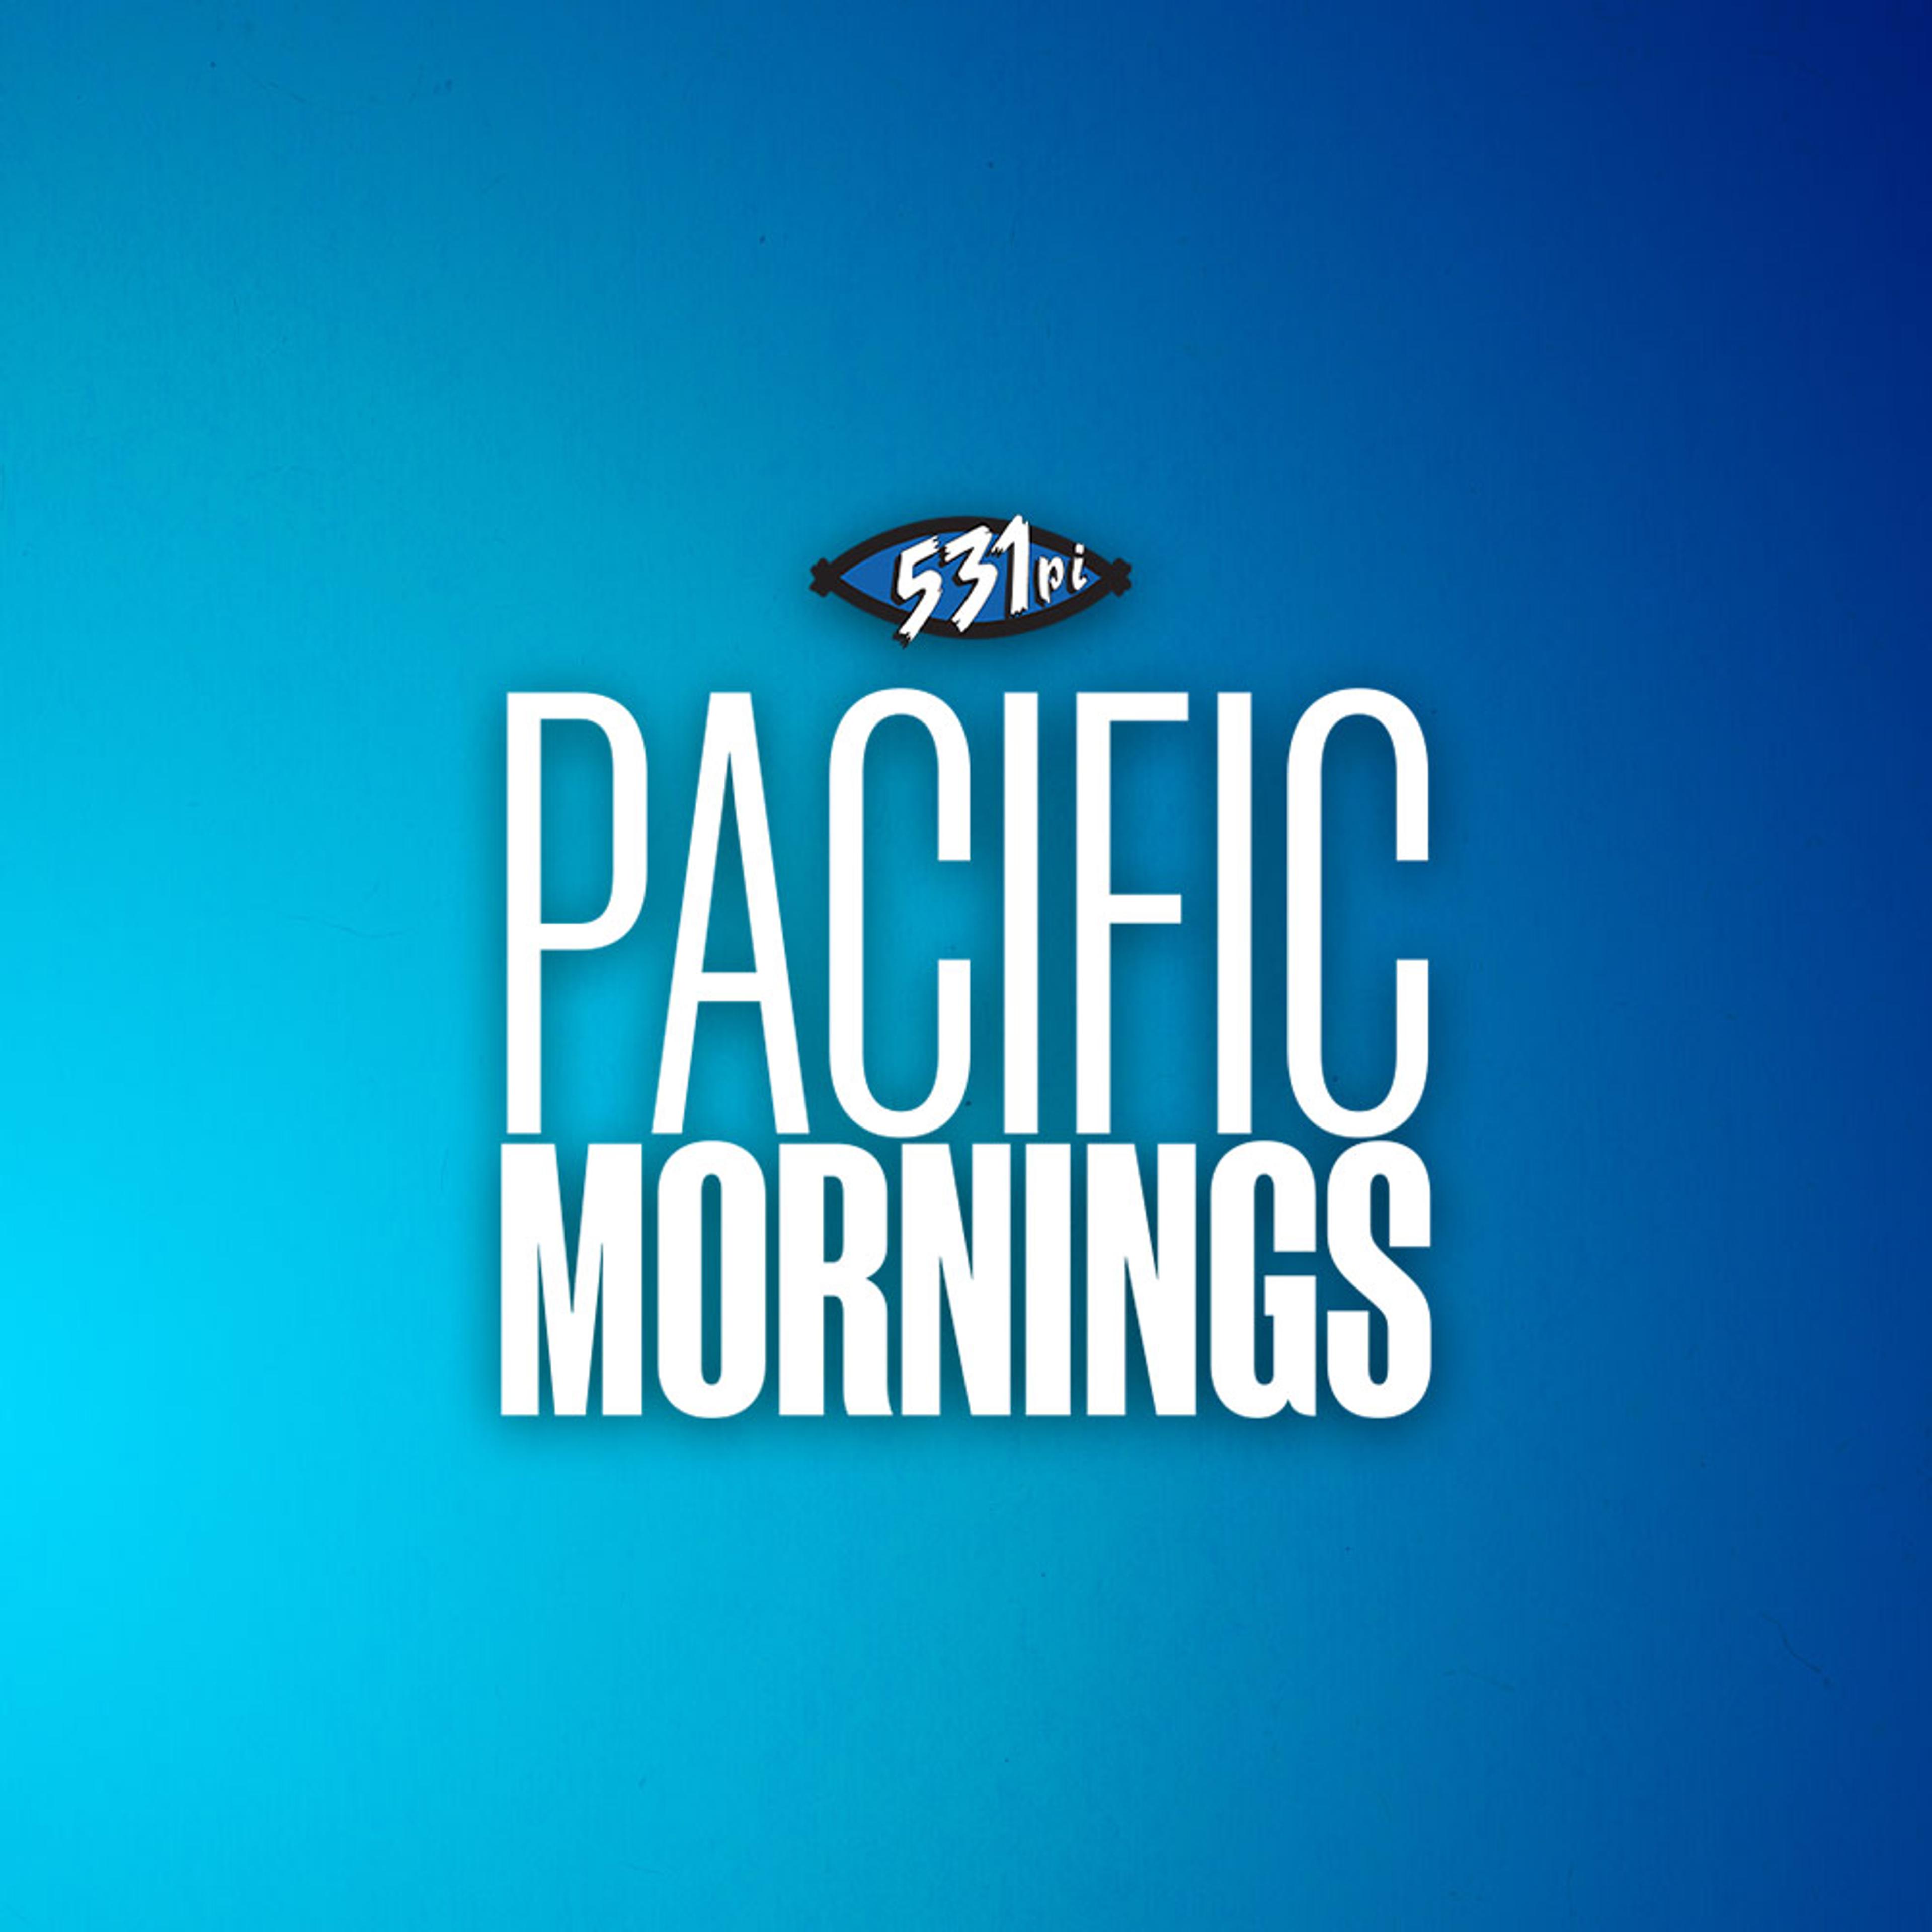 Pacific Mornings